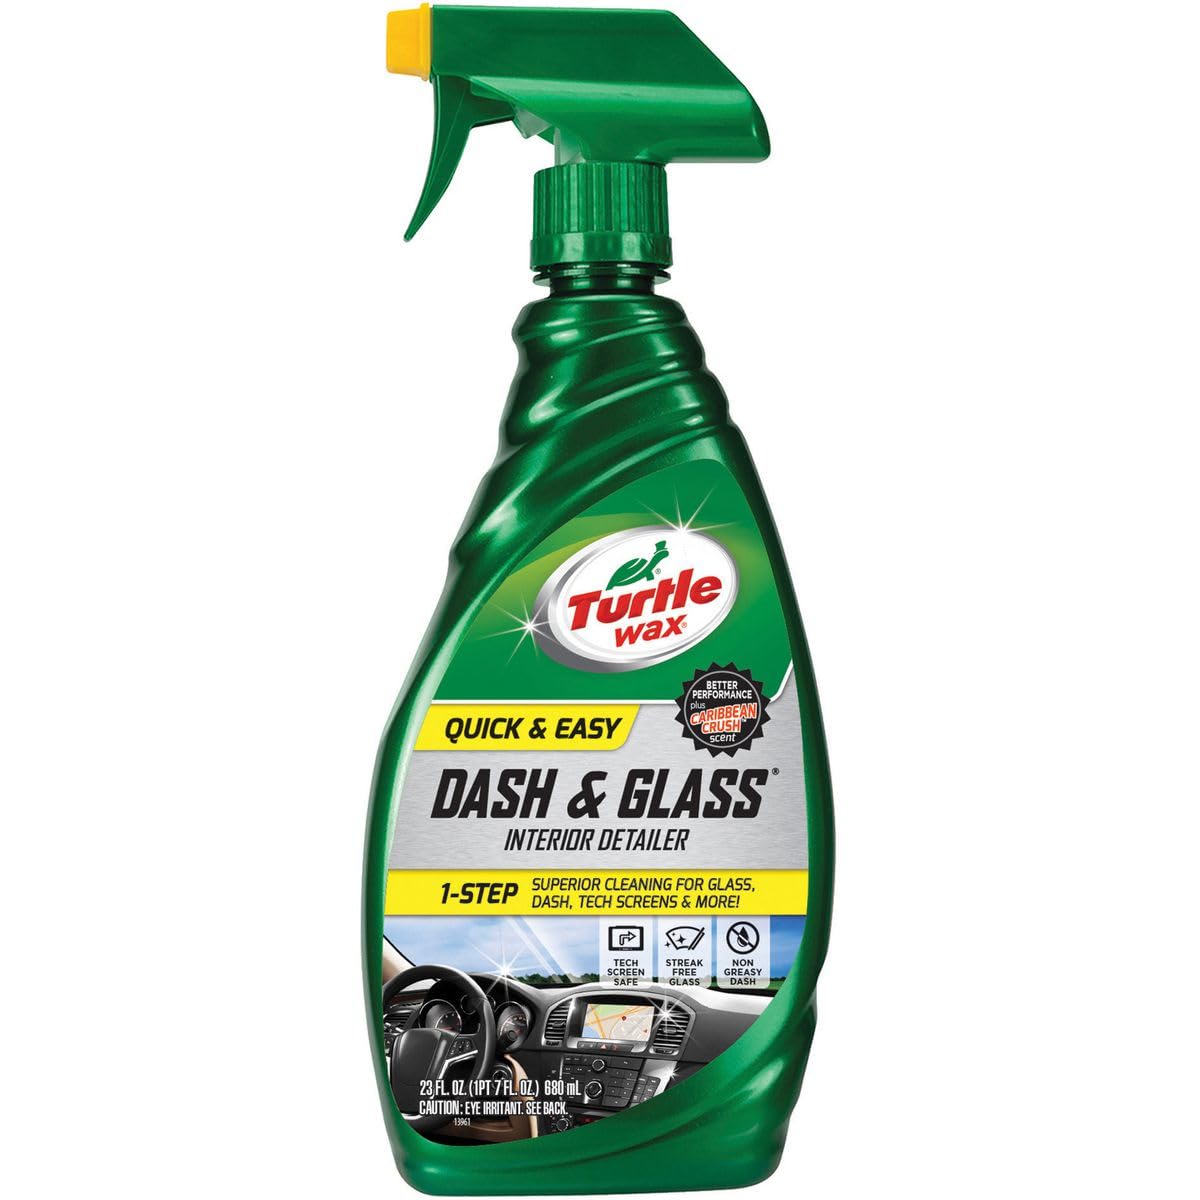 Turtle Wax T-930 Dash and Glass Protectant with Foaming Trigger - 23 fl. oz. by Turtle Wax